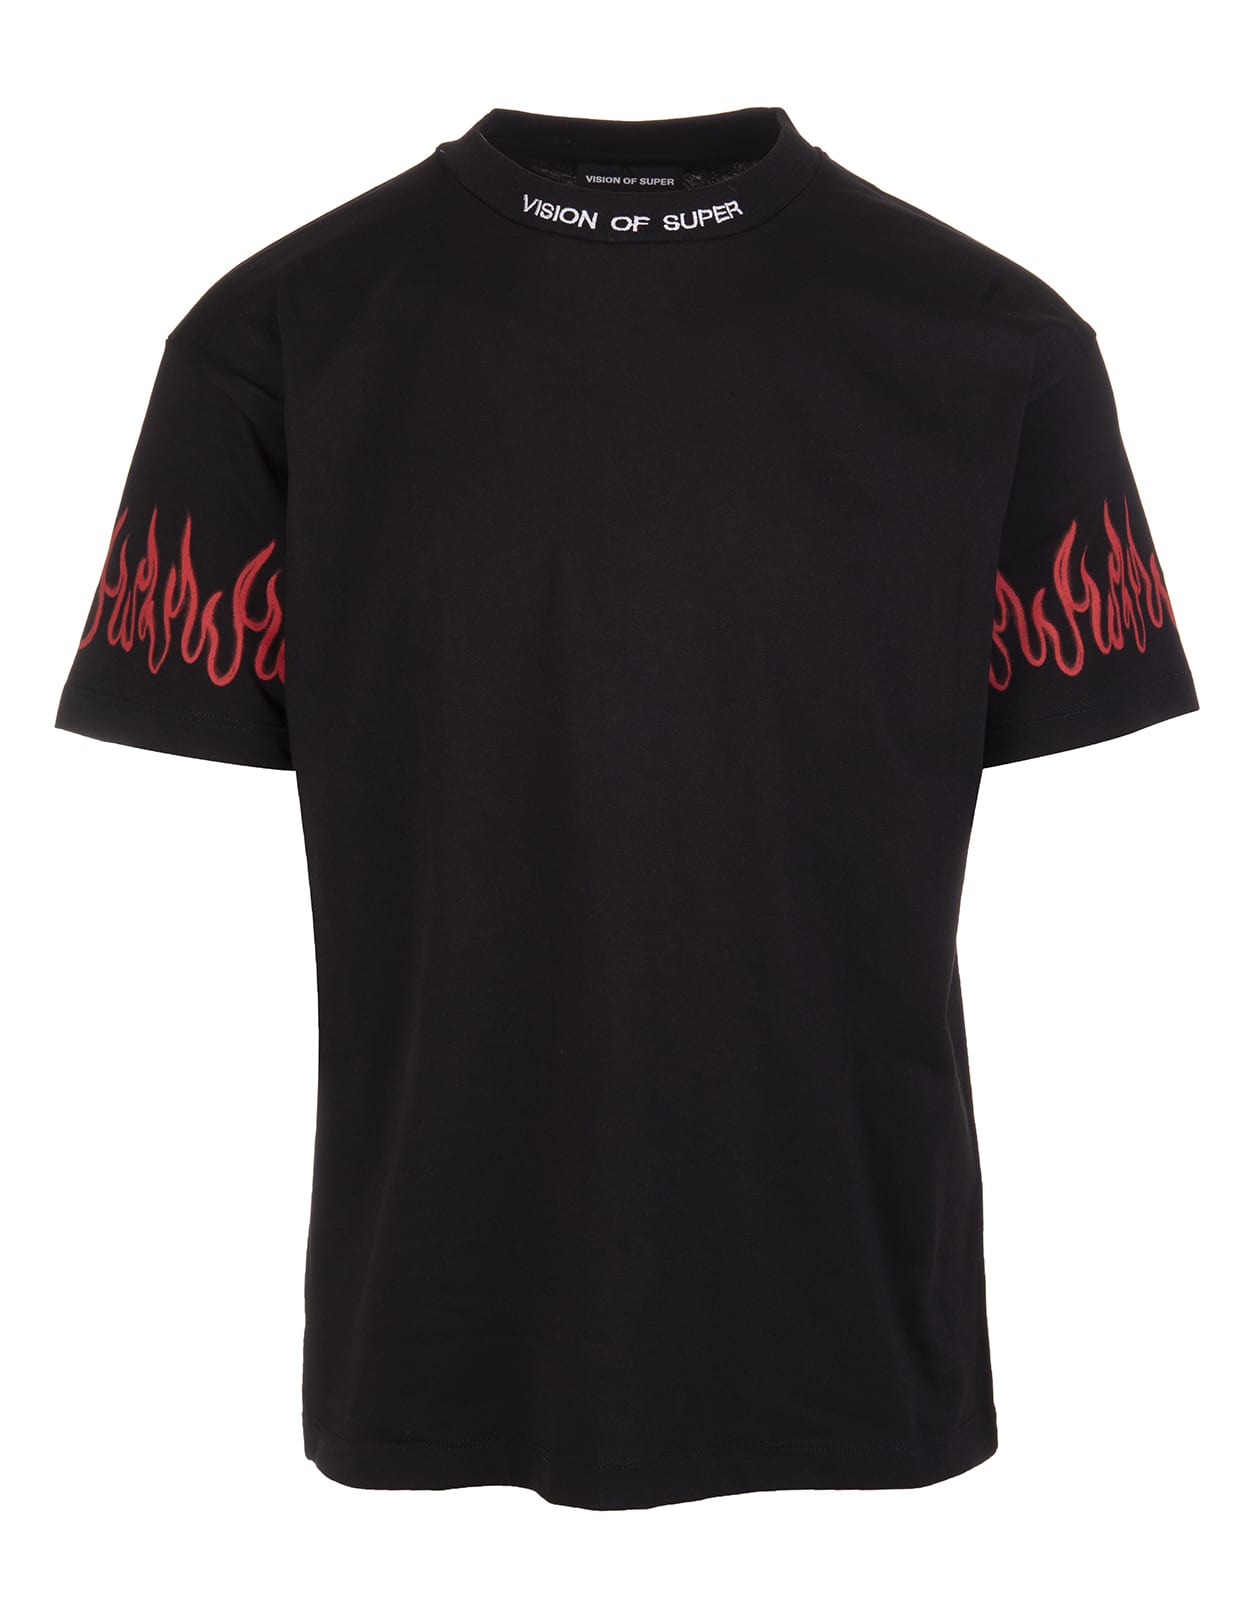 Vision of Super Black Unisex T-shirt With Logo And Red Spray Flames Print